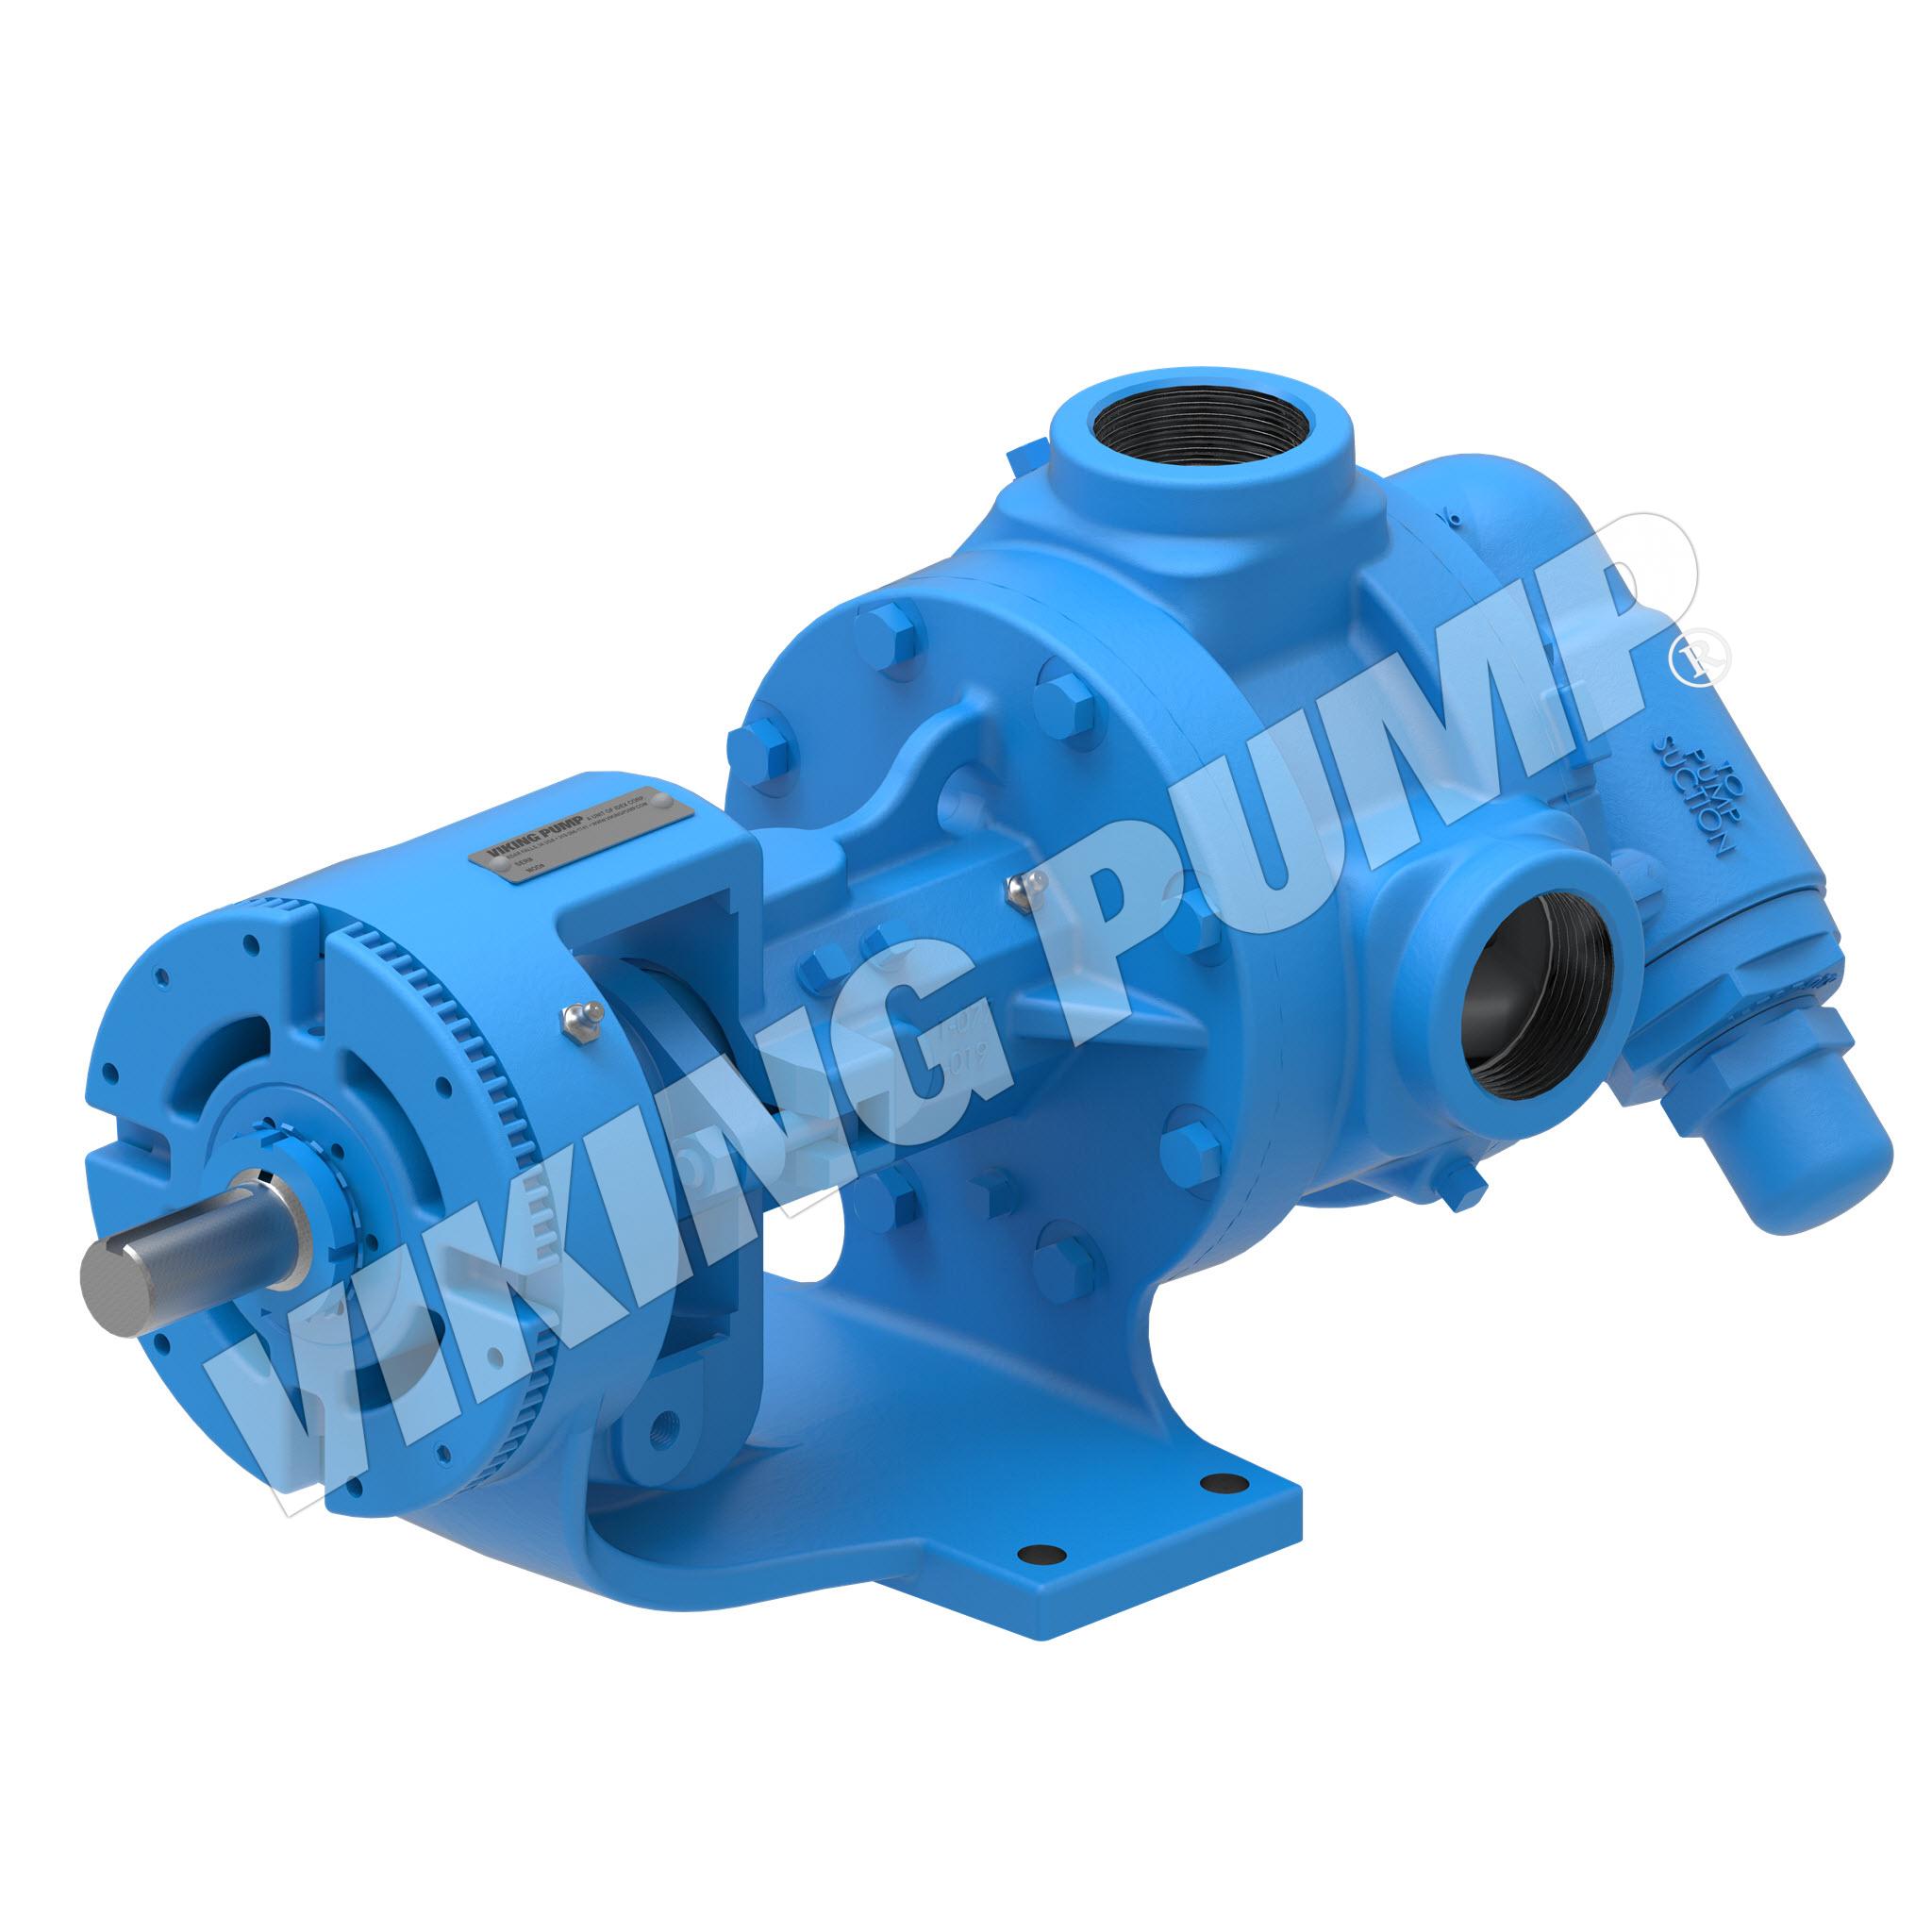 Model K4126A, Foot Mounted, Mechanical Seal, Relief Valve Pump